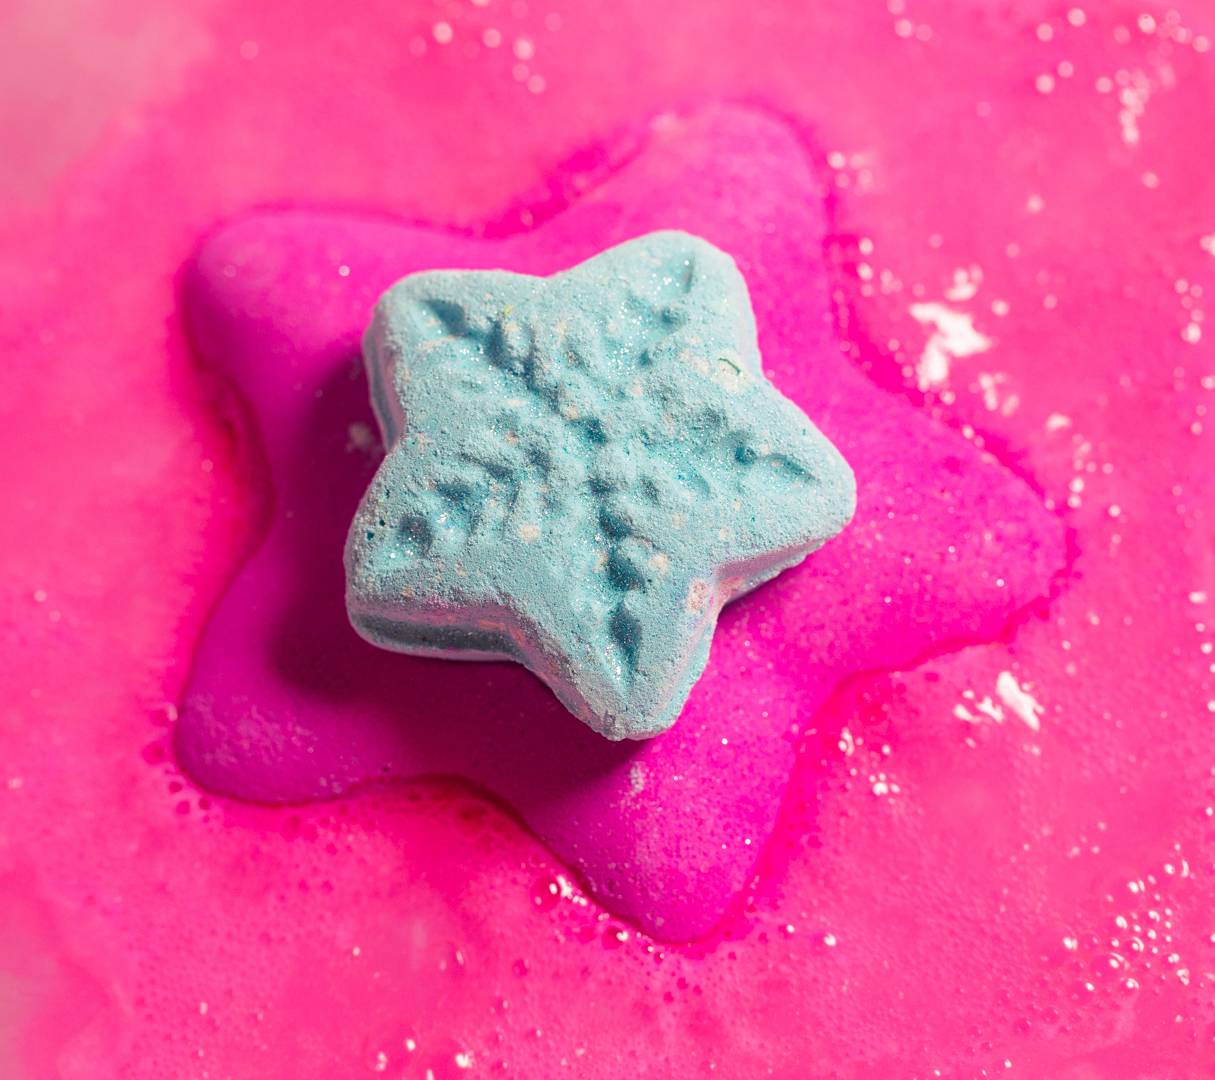 Snow Fairy Lights bath bomb floats on the water casting out a blanket of vibrant, hot-pink foamy swirls.